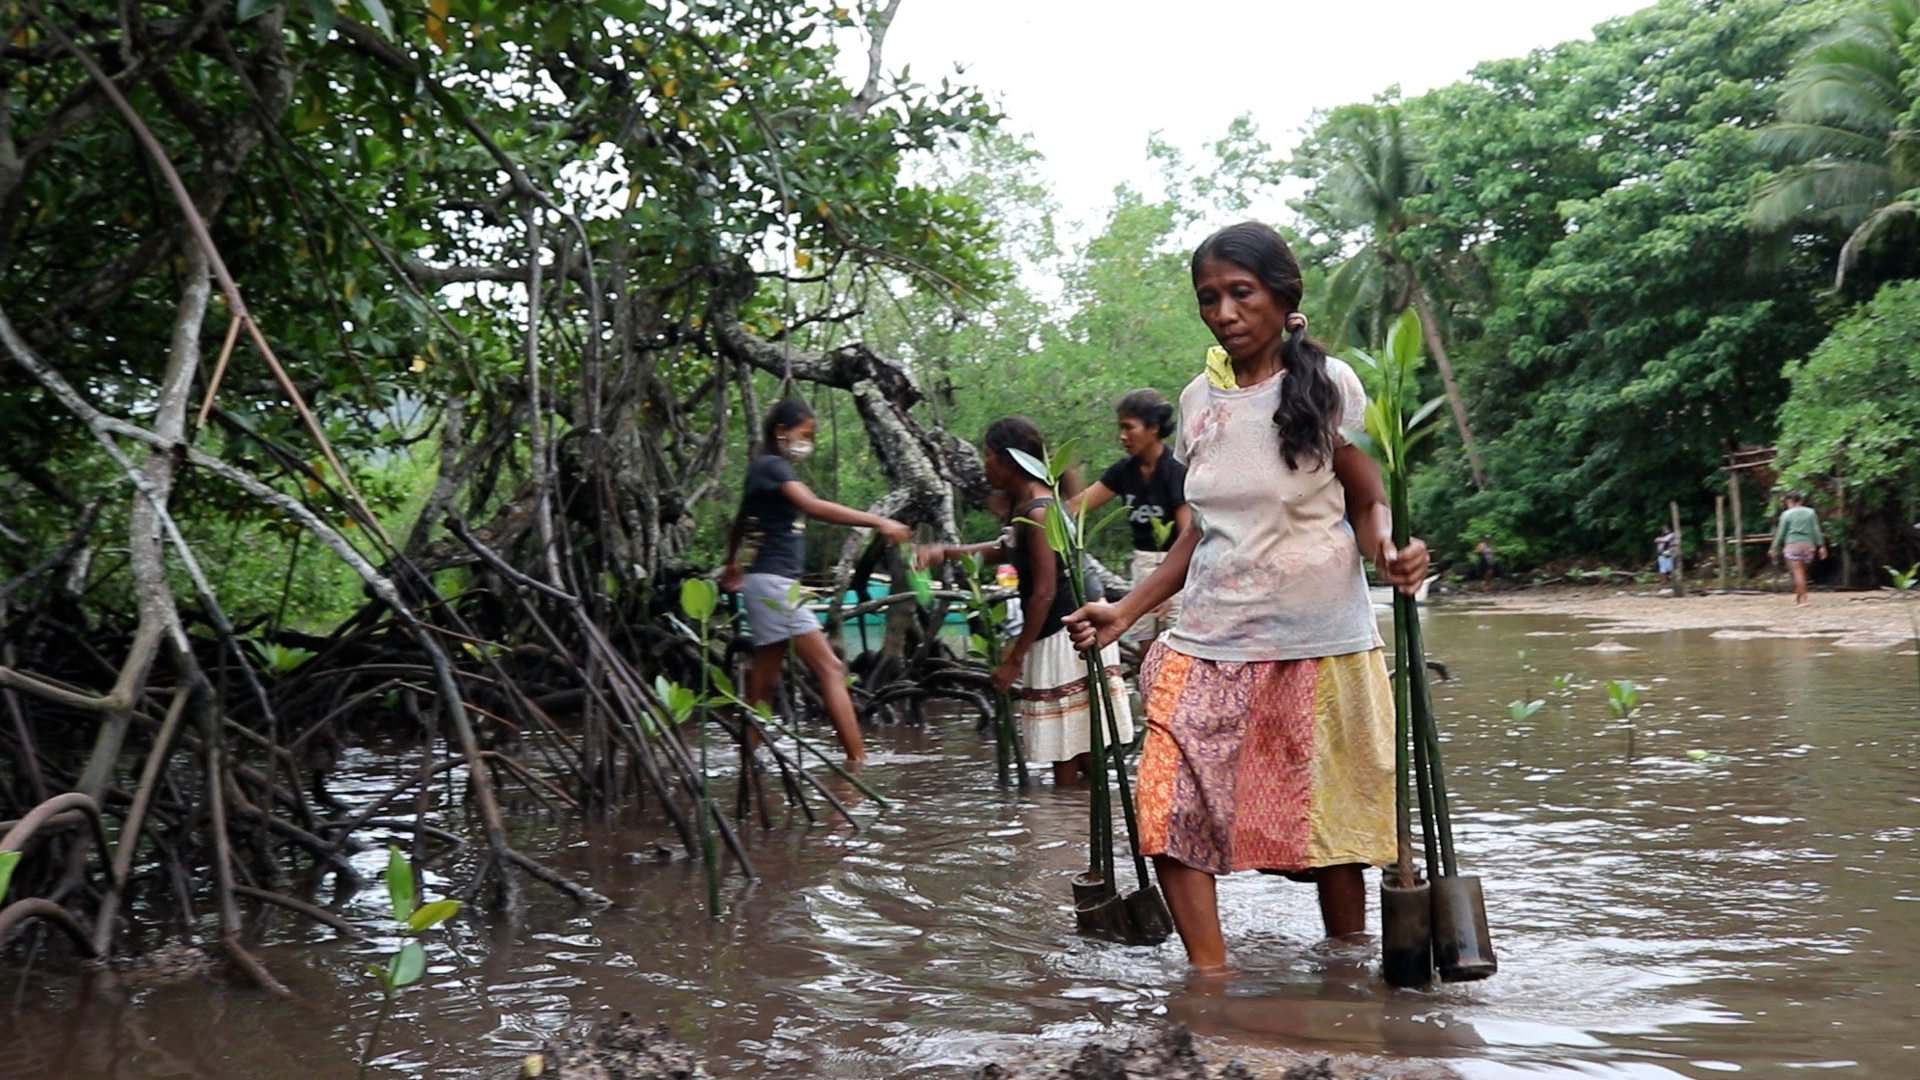 Woman conservation farmer walking through ankle-deep water carrying plants in the Philippines.